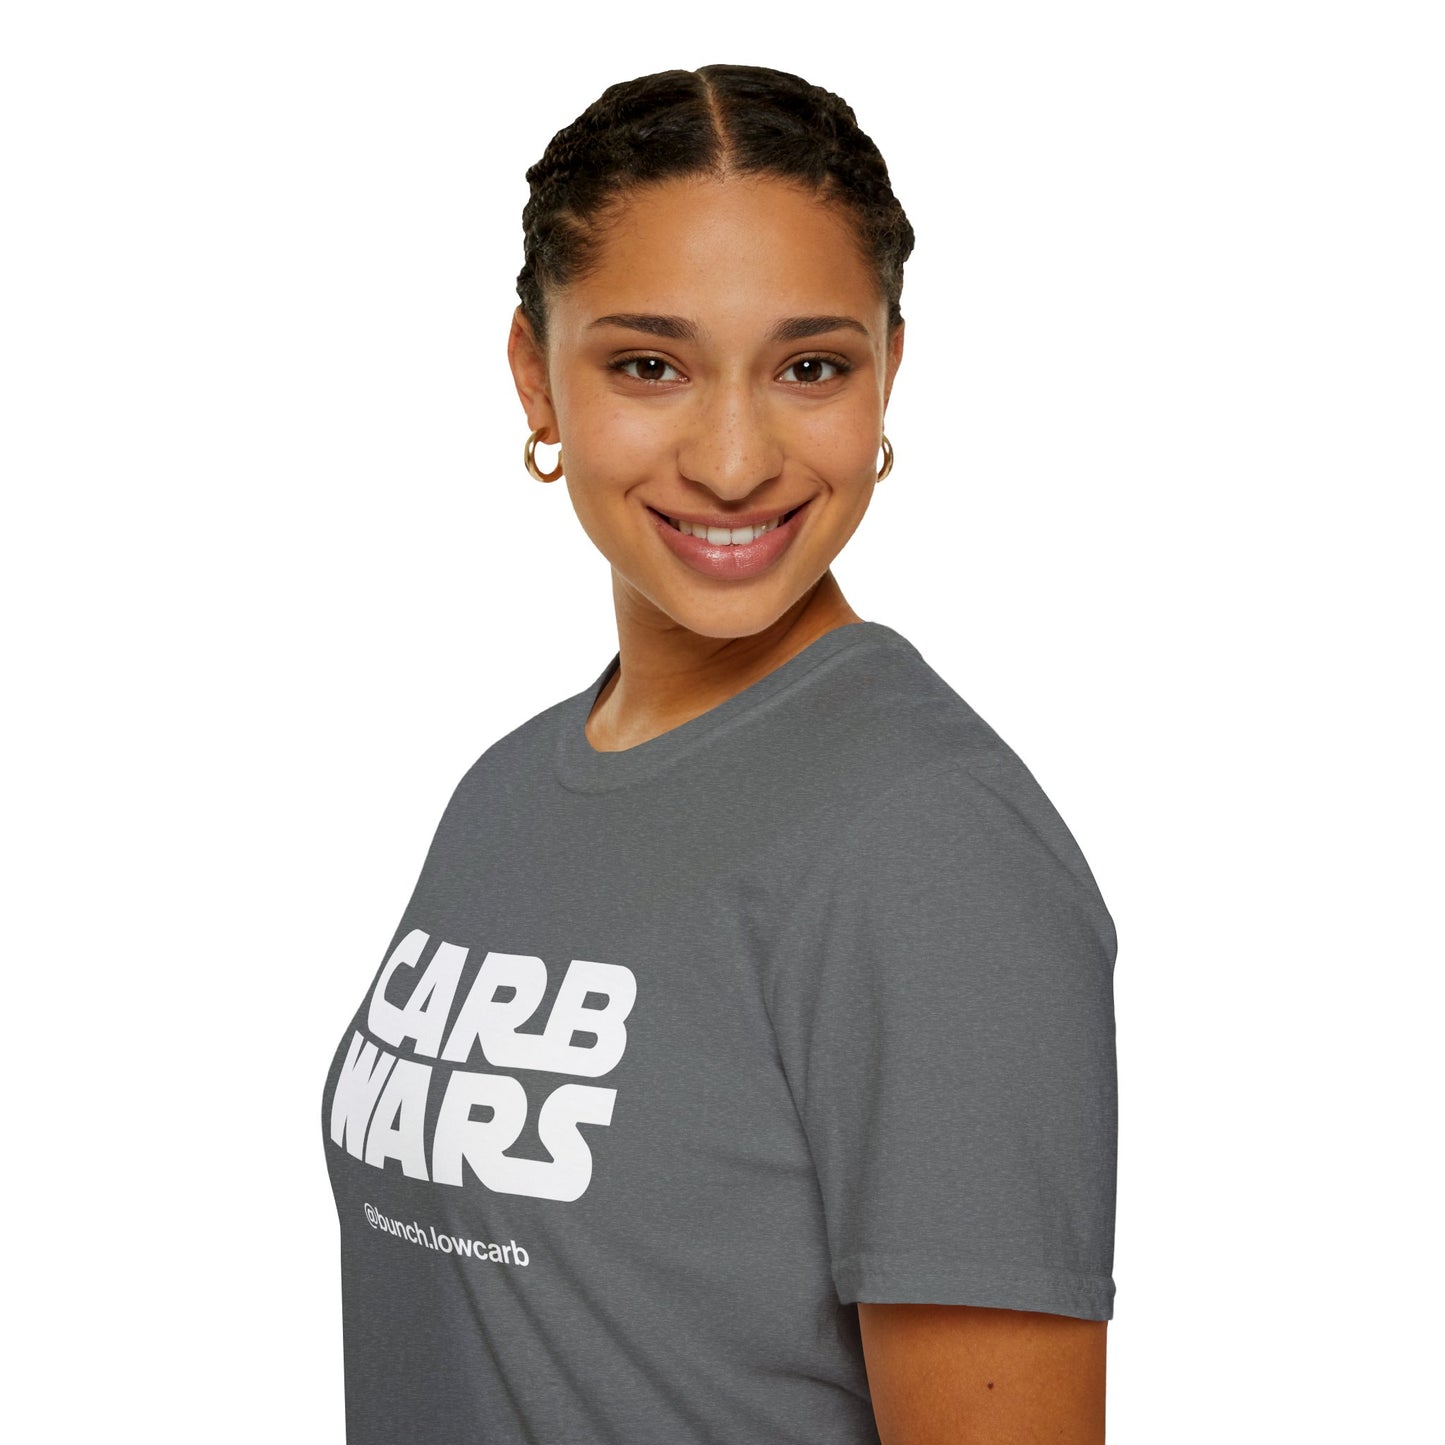 Bunch Carb Wars - Unisex Softstyle T-Shirt